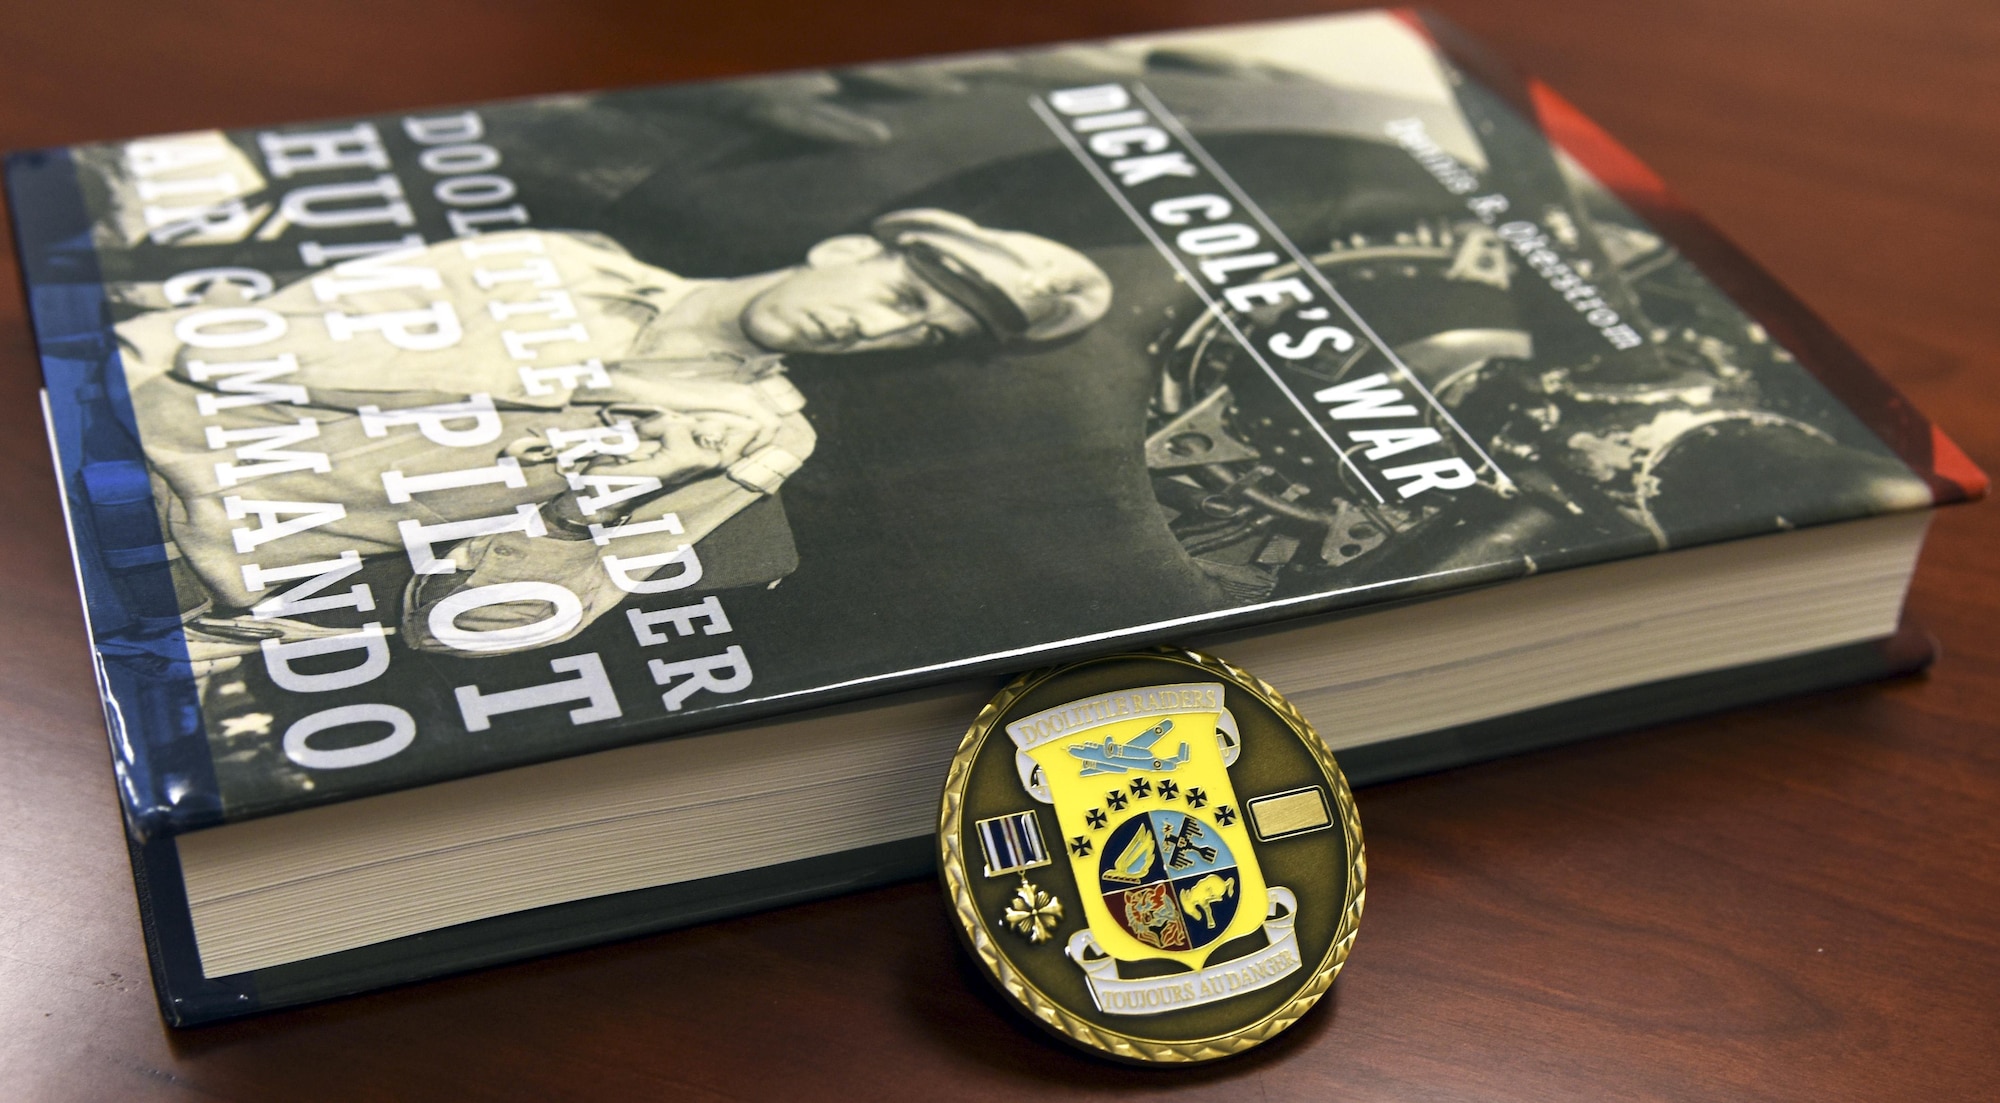 Retired Lt. Col. Richard Cole, the last remaining Doolittle Raider, gave the 337th Test and Evaluation Squadron a Doolittle Raider coin and book as a token of appreciation for naming the Air Force's newest bomber in their honor. Cole was invited to the naming ceremony last month when the Air Force introduced the bomber as the B-21 Raider. (Courtesy photo)
